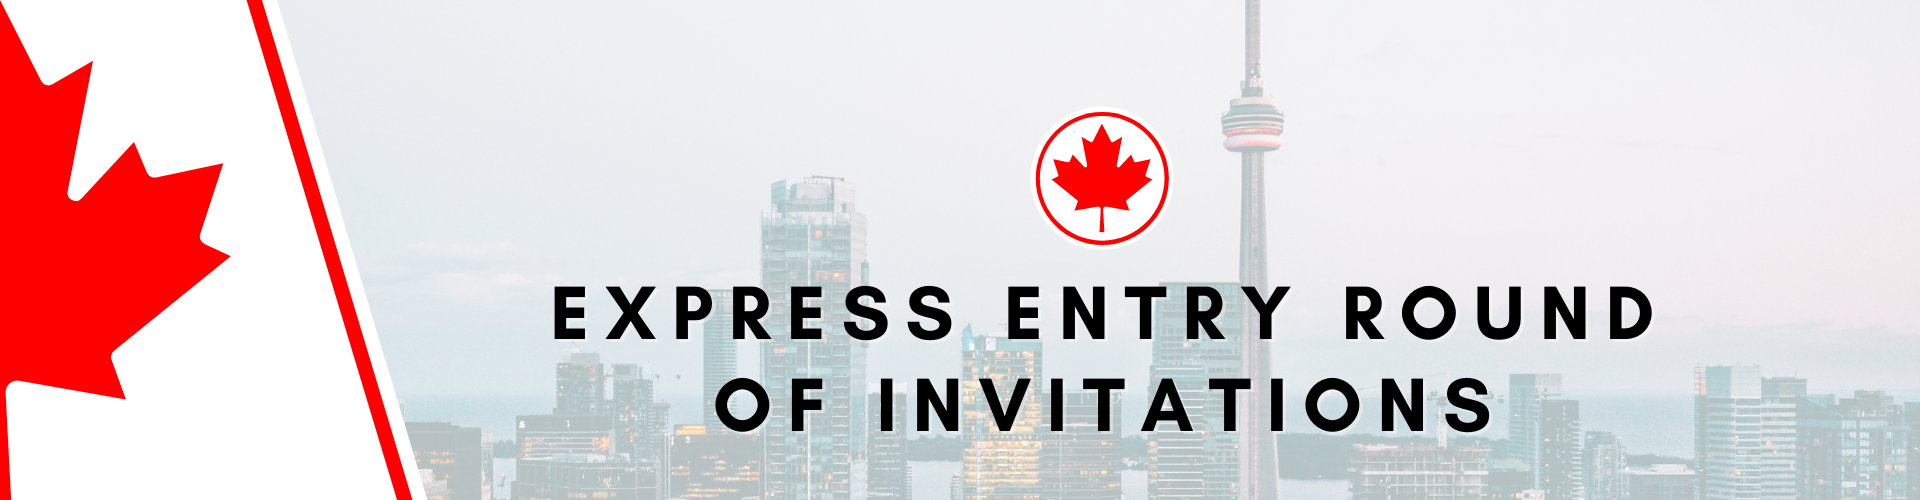 express-entry-round-of-invitation